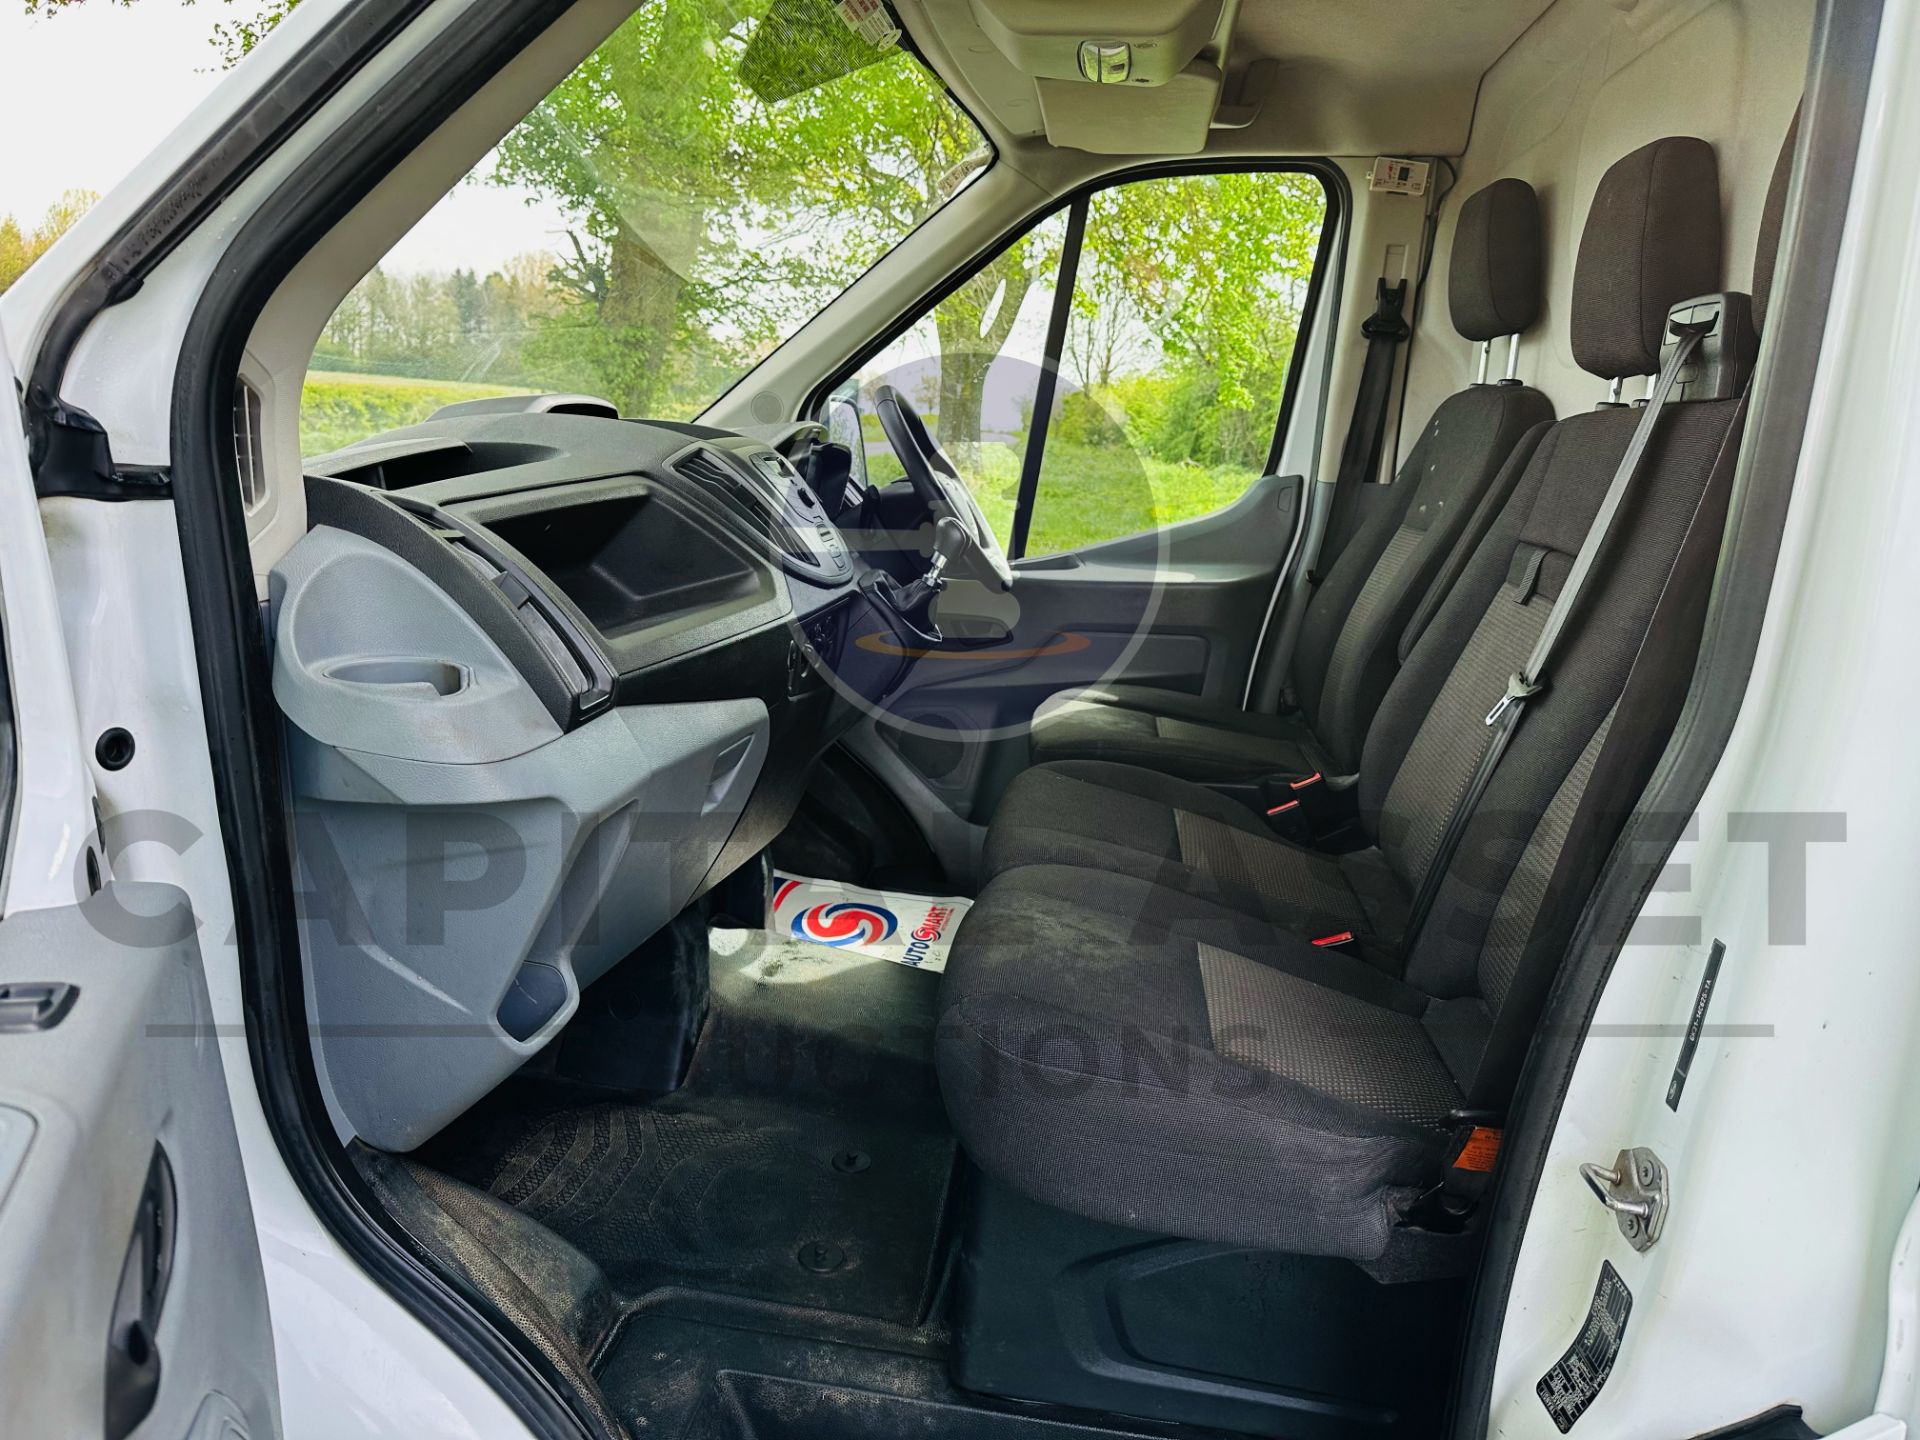 FORD TRANSIT 350 2.0 TDCI *ECOBLUE EDITION* LWB HIGH TOP - EURO 6 - 2019 MODEL - 1 OWNER - LOOK!!! - Image 18 of 32